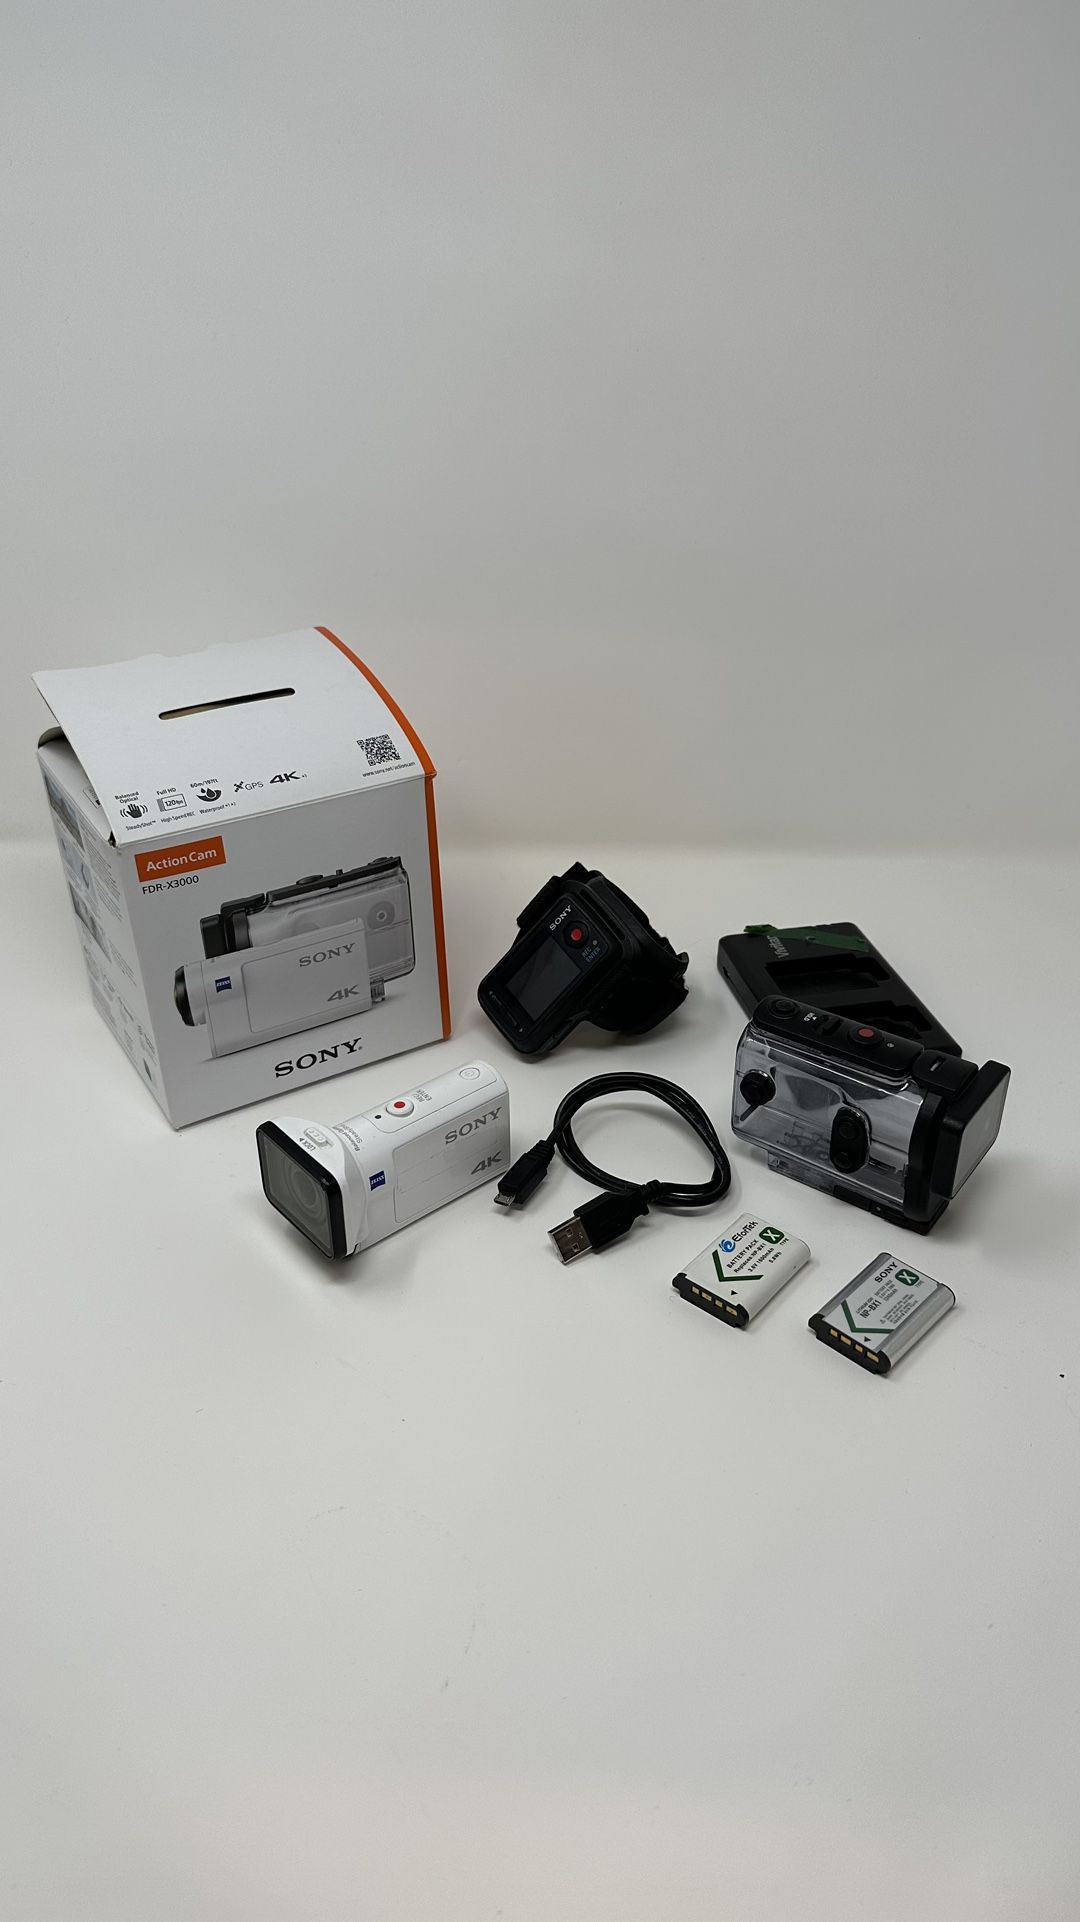 Sony FDR-X3000 Action Camera for Sale in Los Angeles, CA